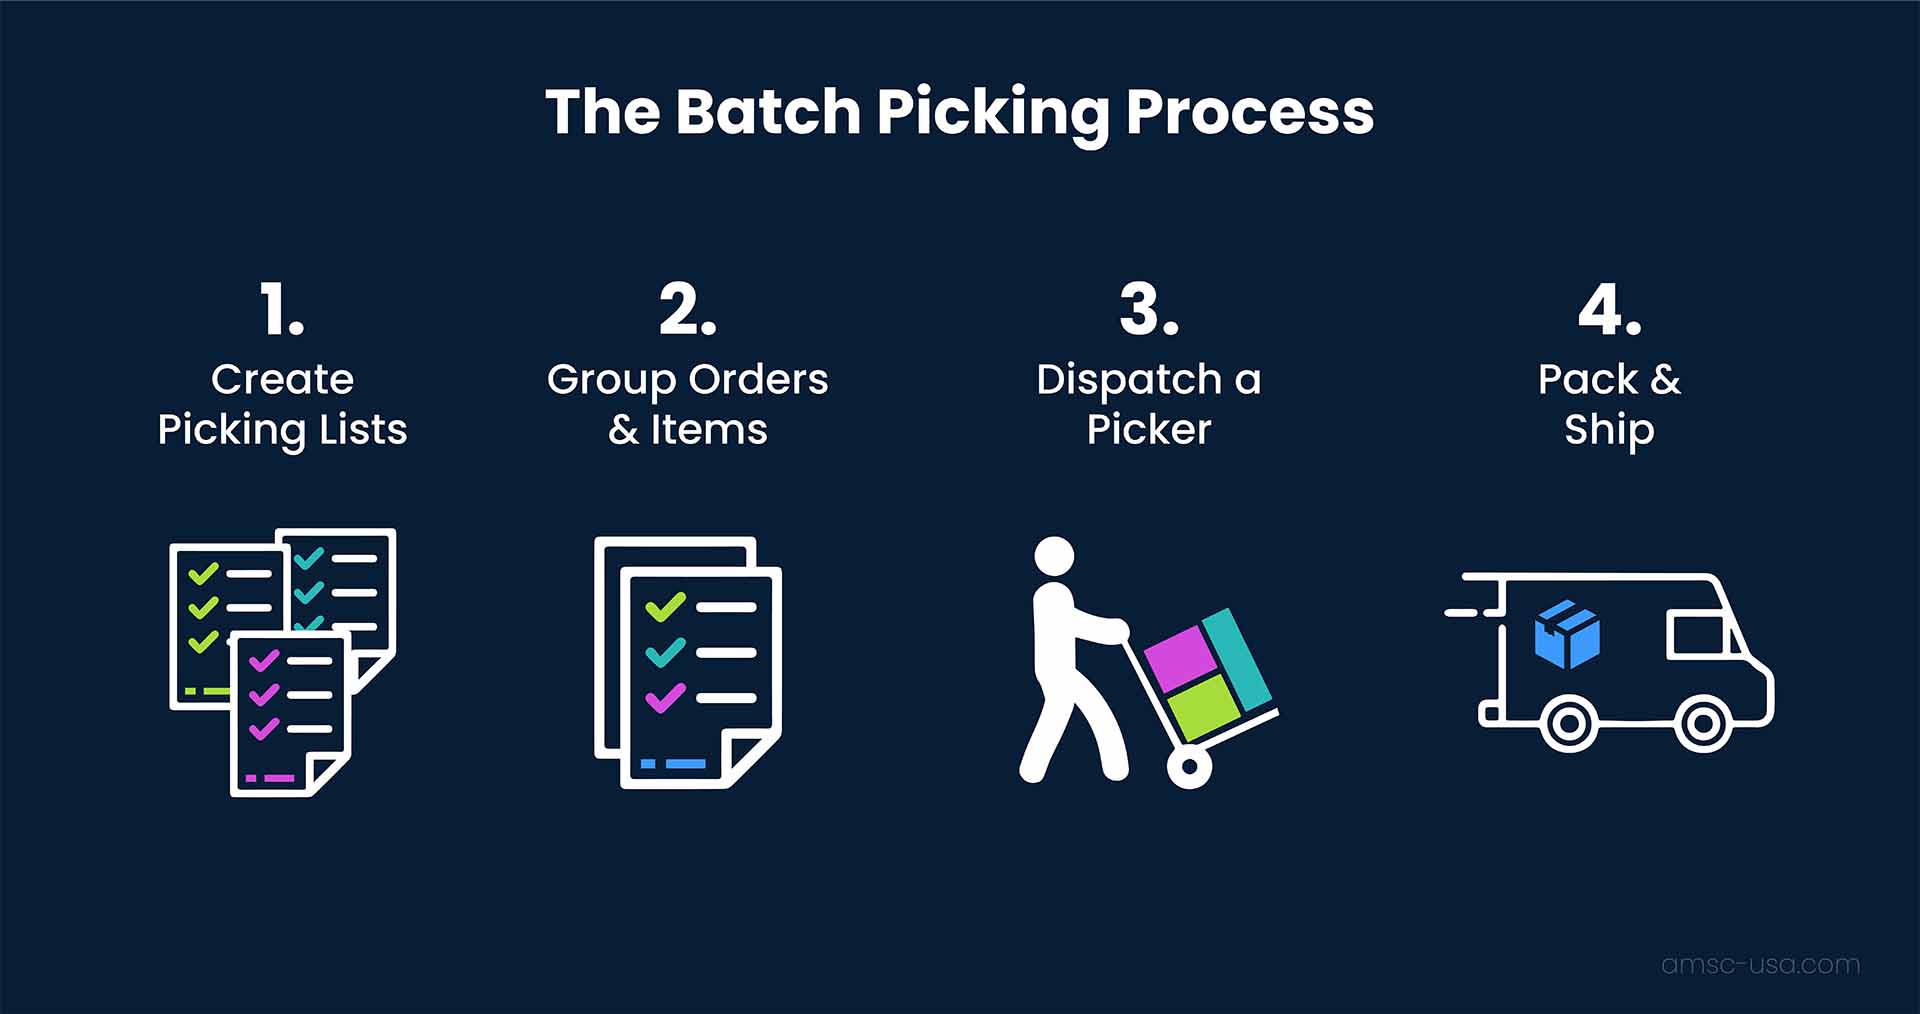 A graphic illustrating the 4 step batch picking process